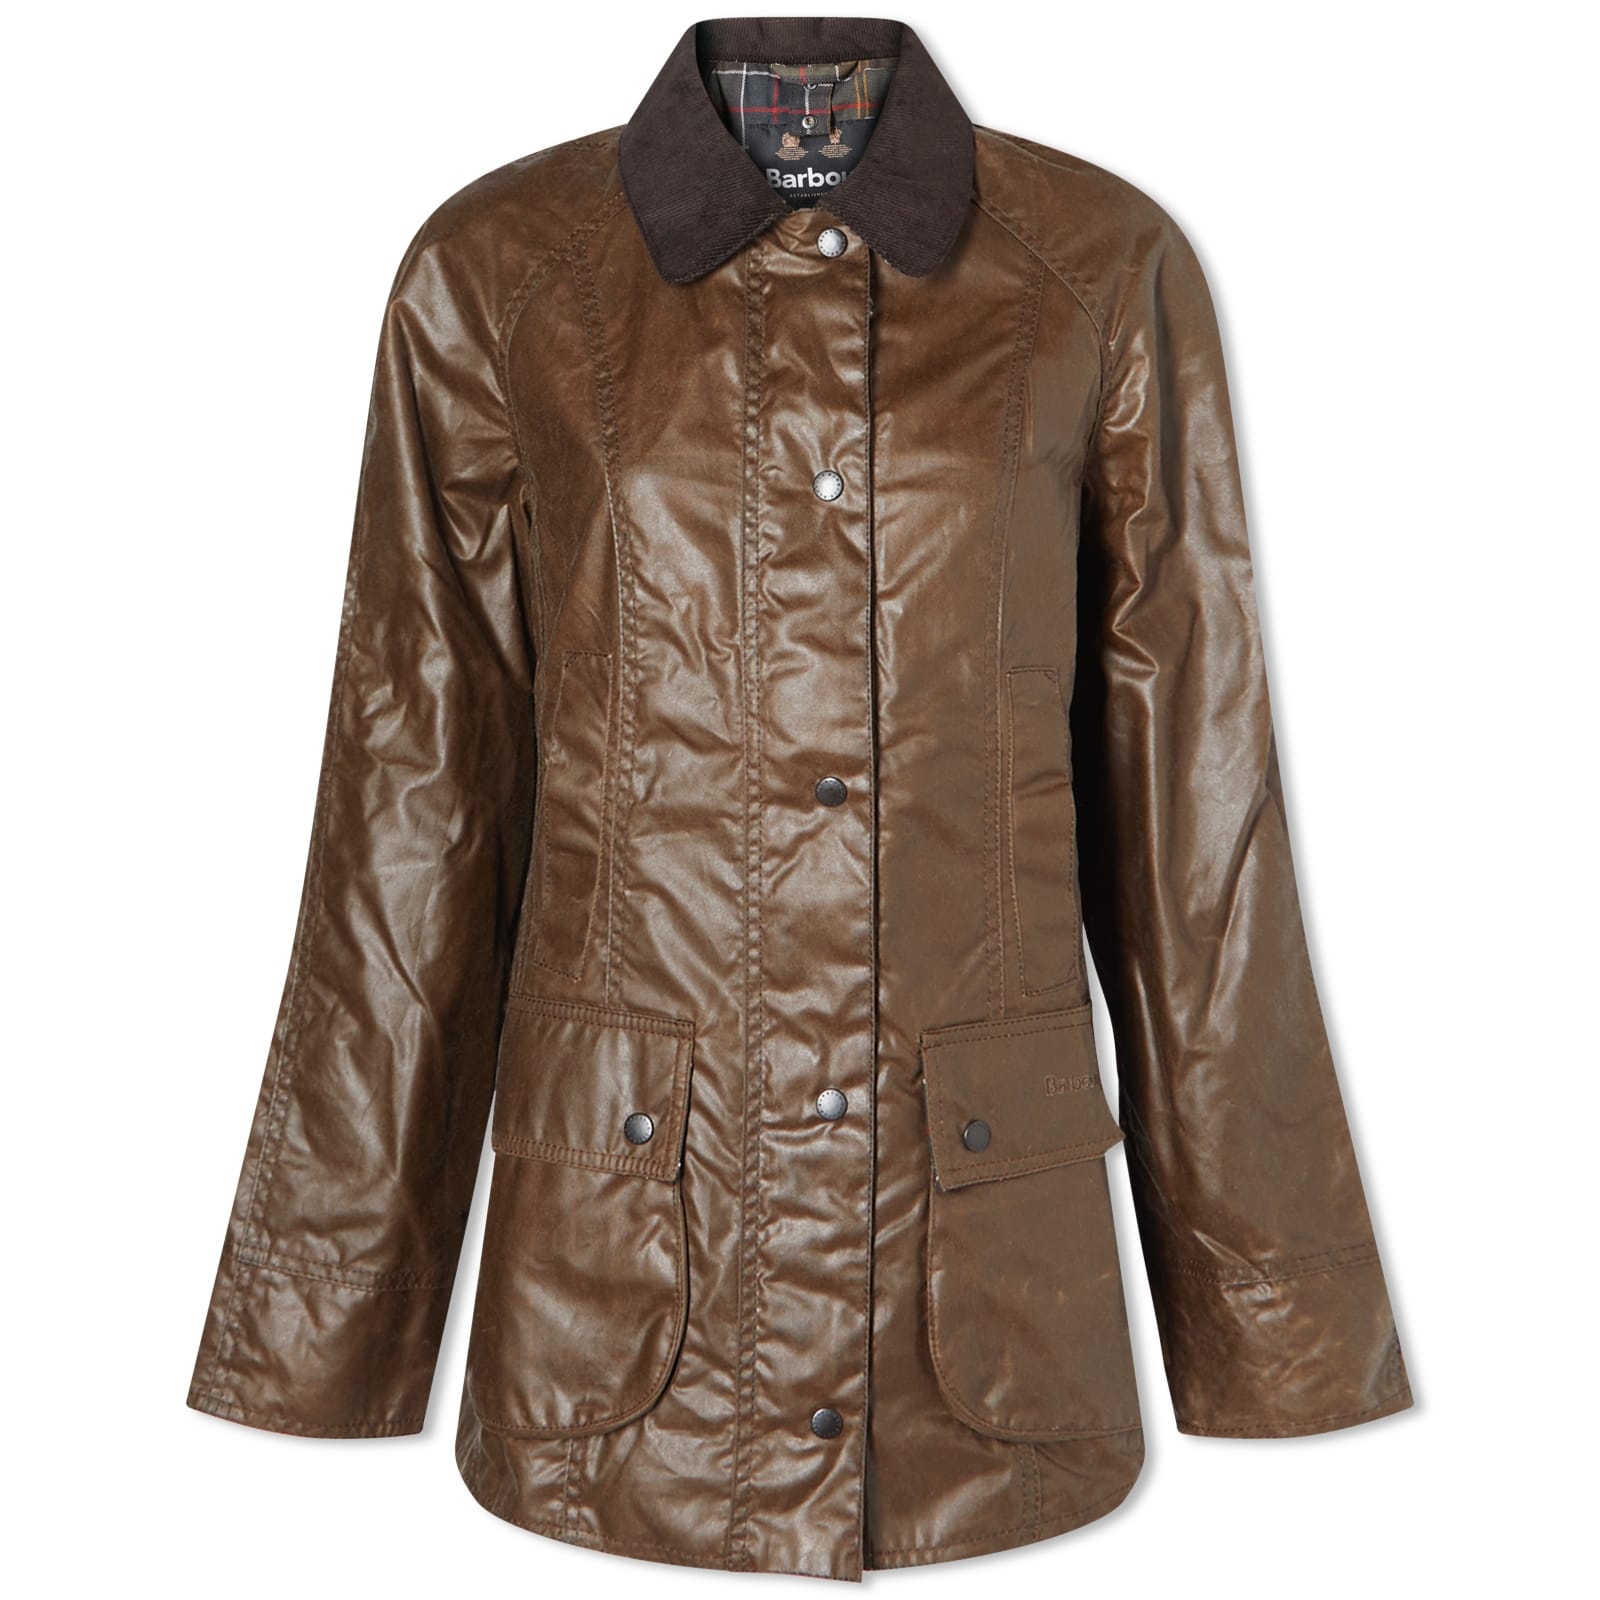 Barbour Beadnell Wax Jacket - 1